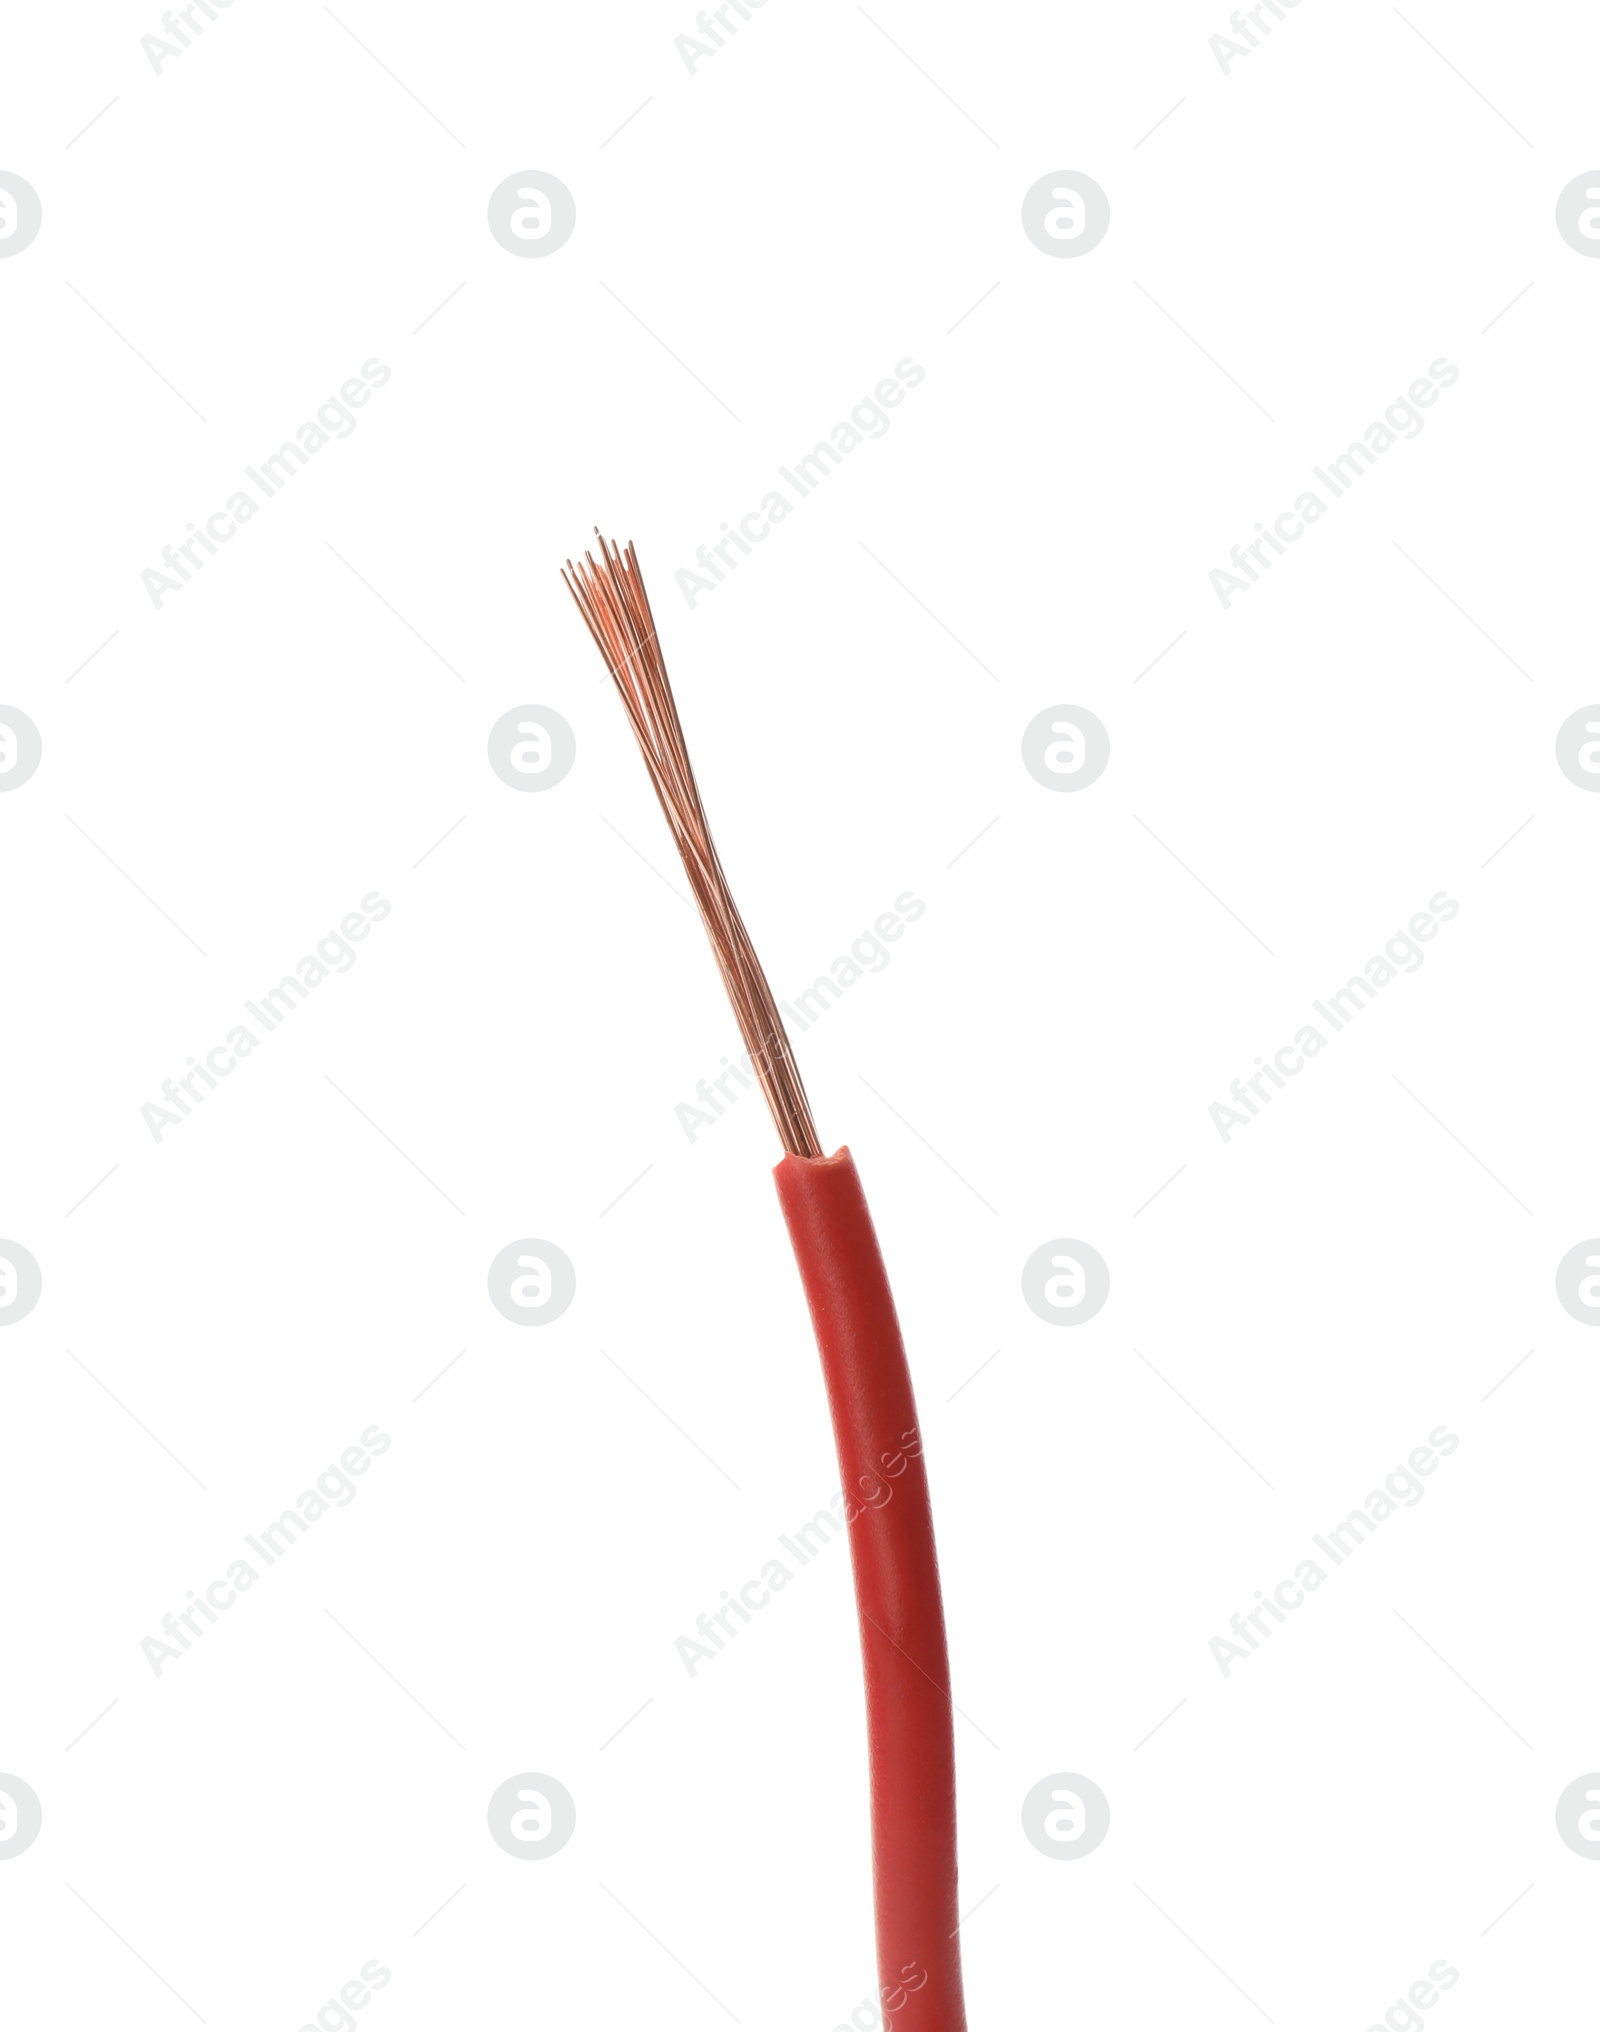 Photo of Stripped electrical wire with red insulation isolated on white